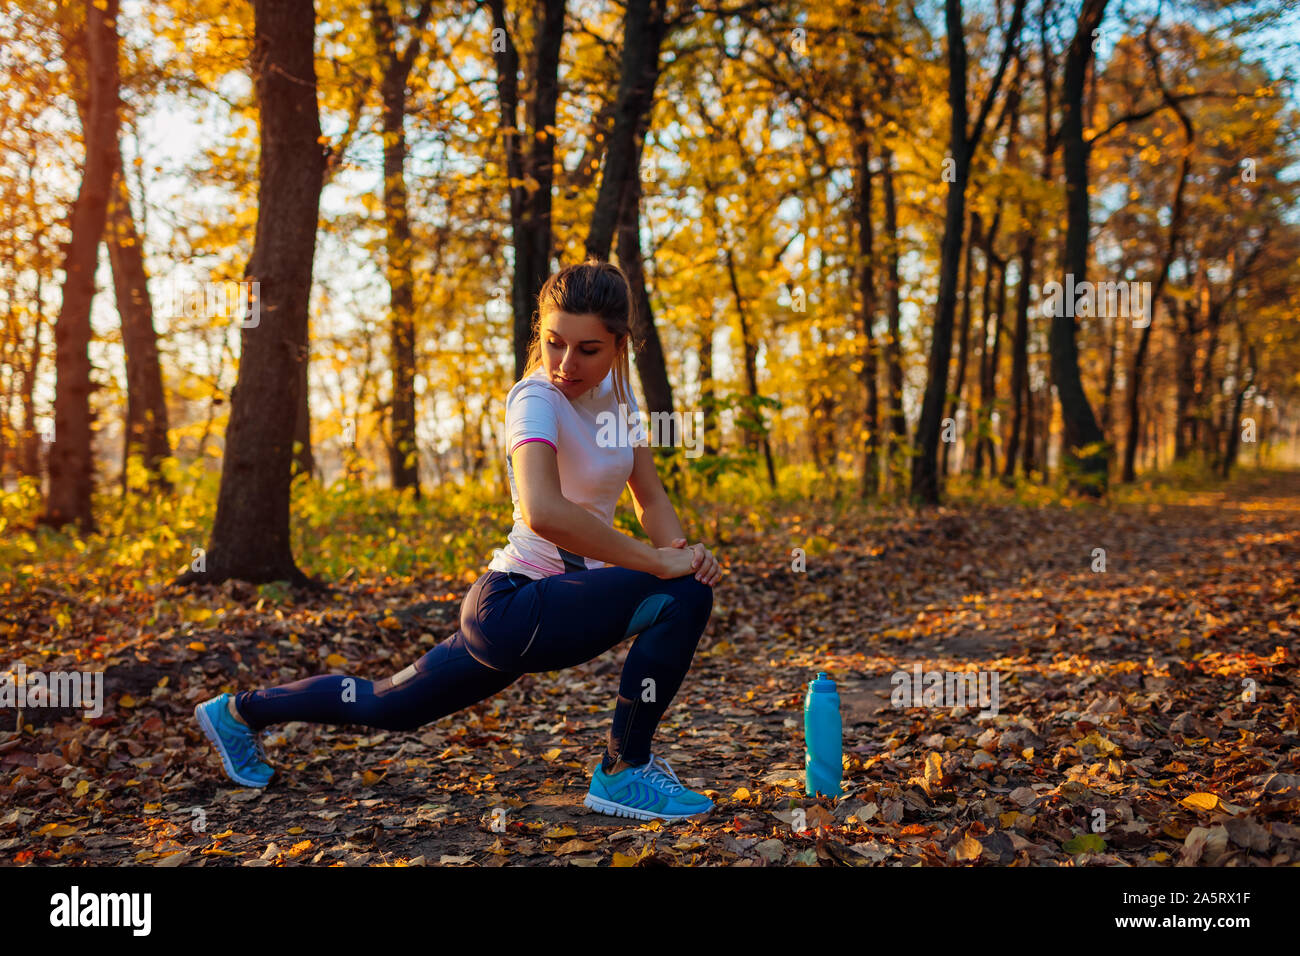 Training and exercising in autumn park. Young woman stretching legs outdoors. Active healthy lifestyle. Workout Stock Photo